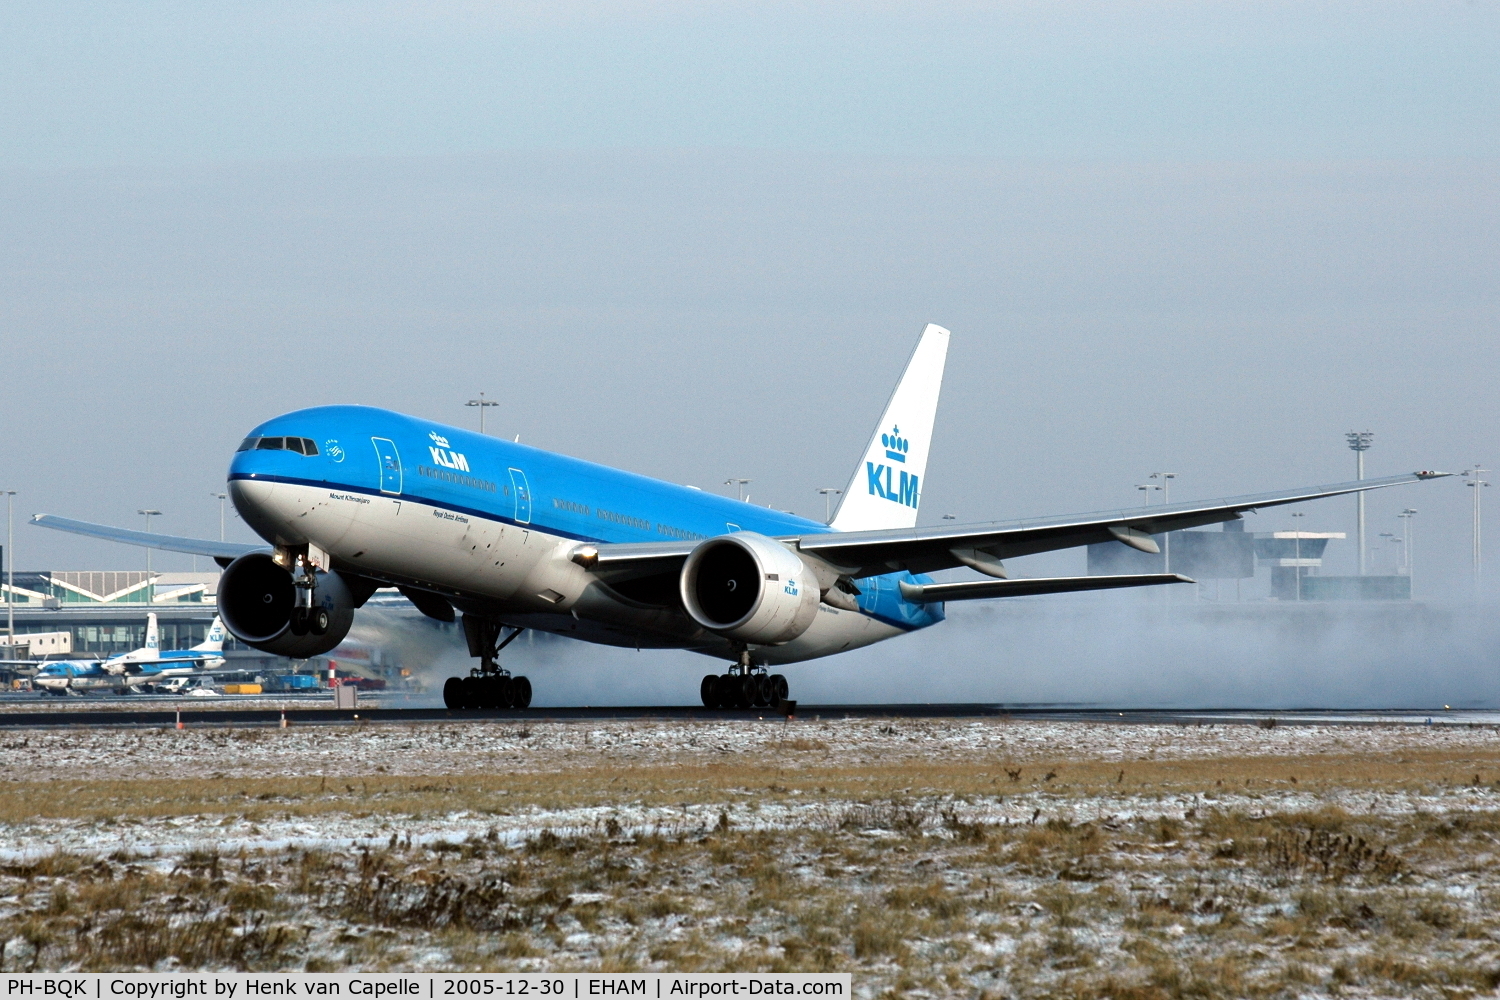 PH-BQK, 2005 Boeing 777-206/ER C/N 29399, KLM Boeing 777-200 kicking up snow while rotating for take off from Amsterdam Schiphol airport.